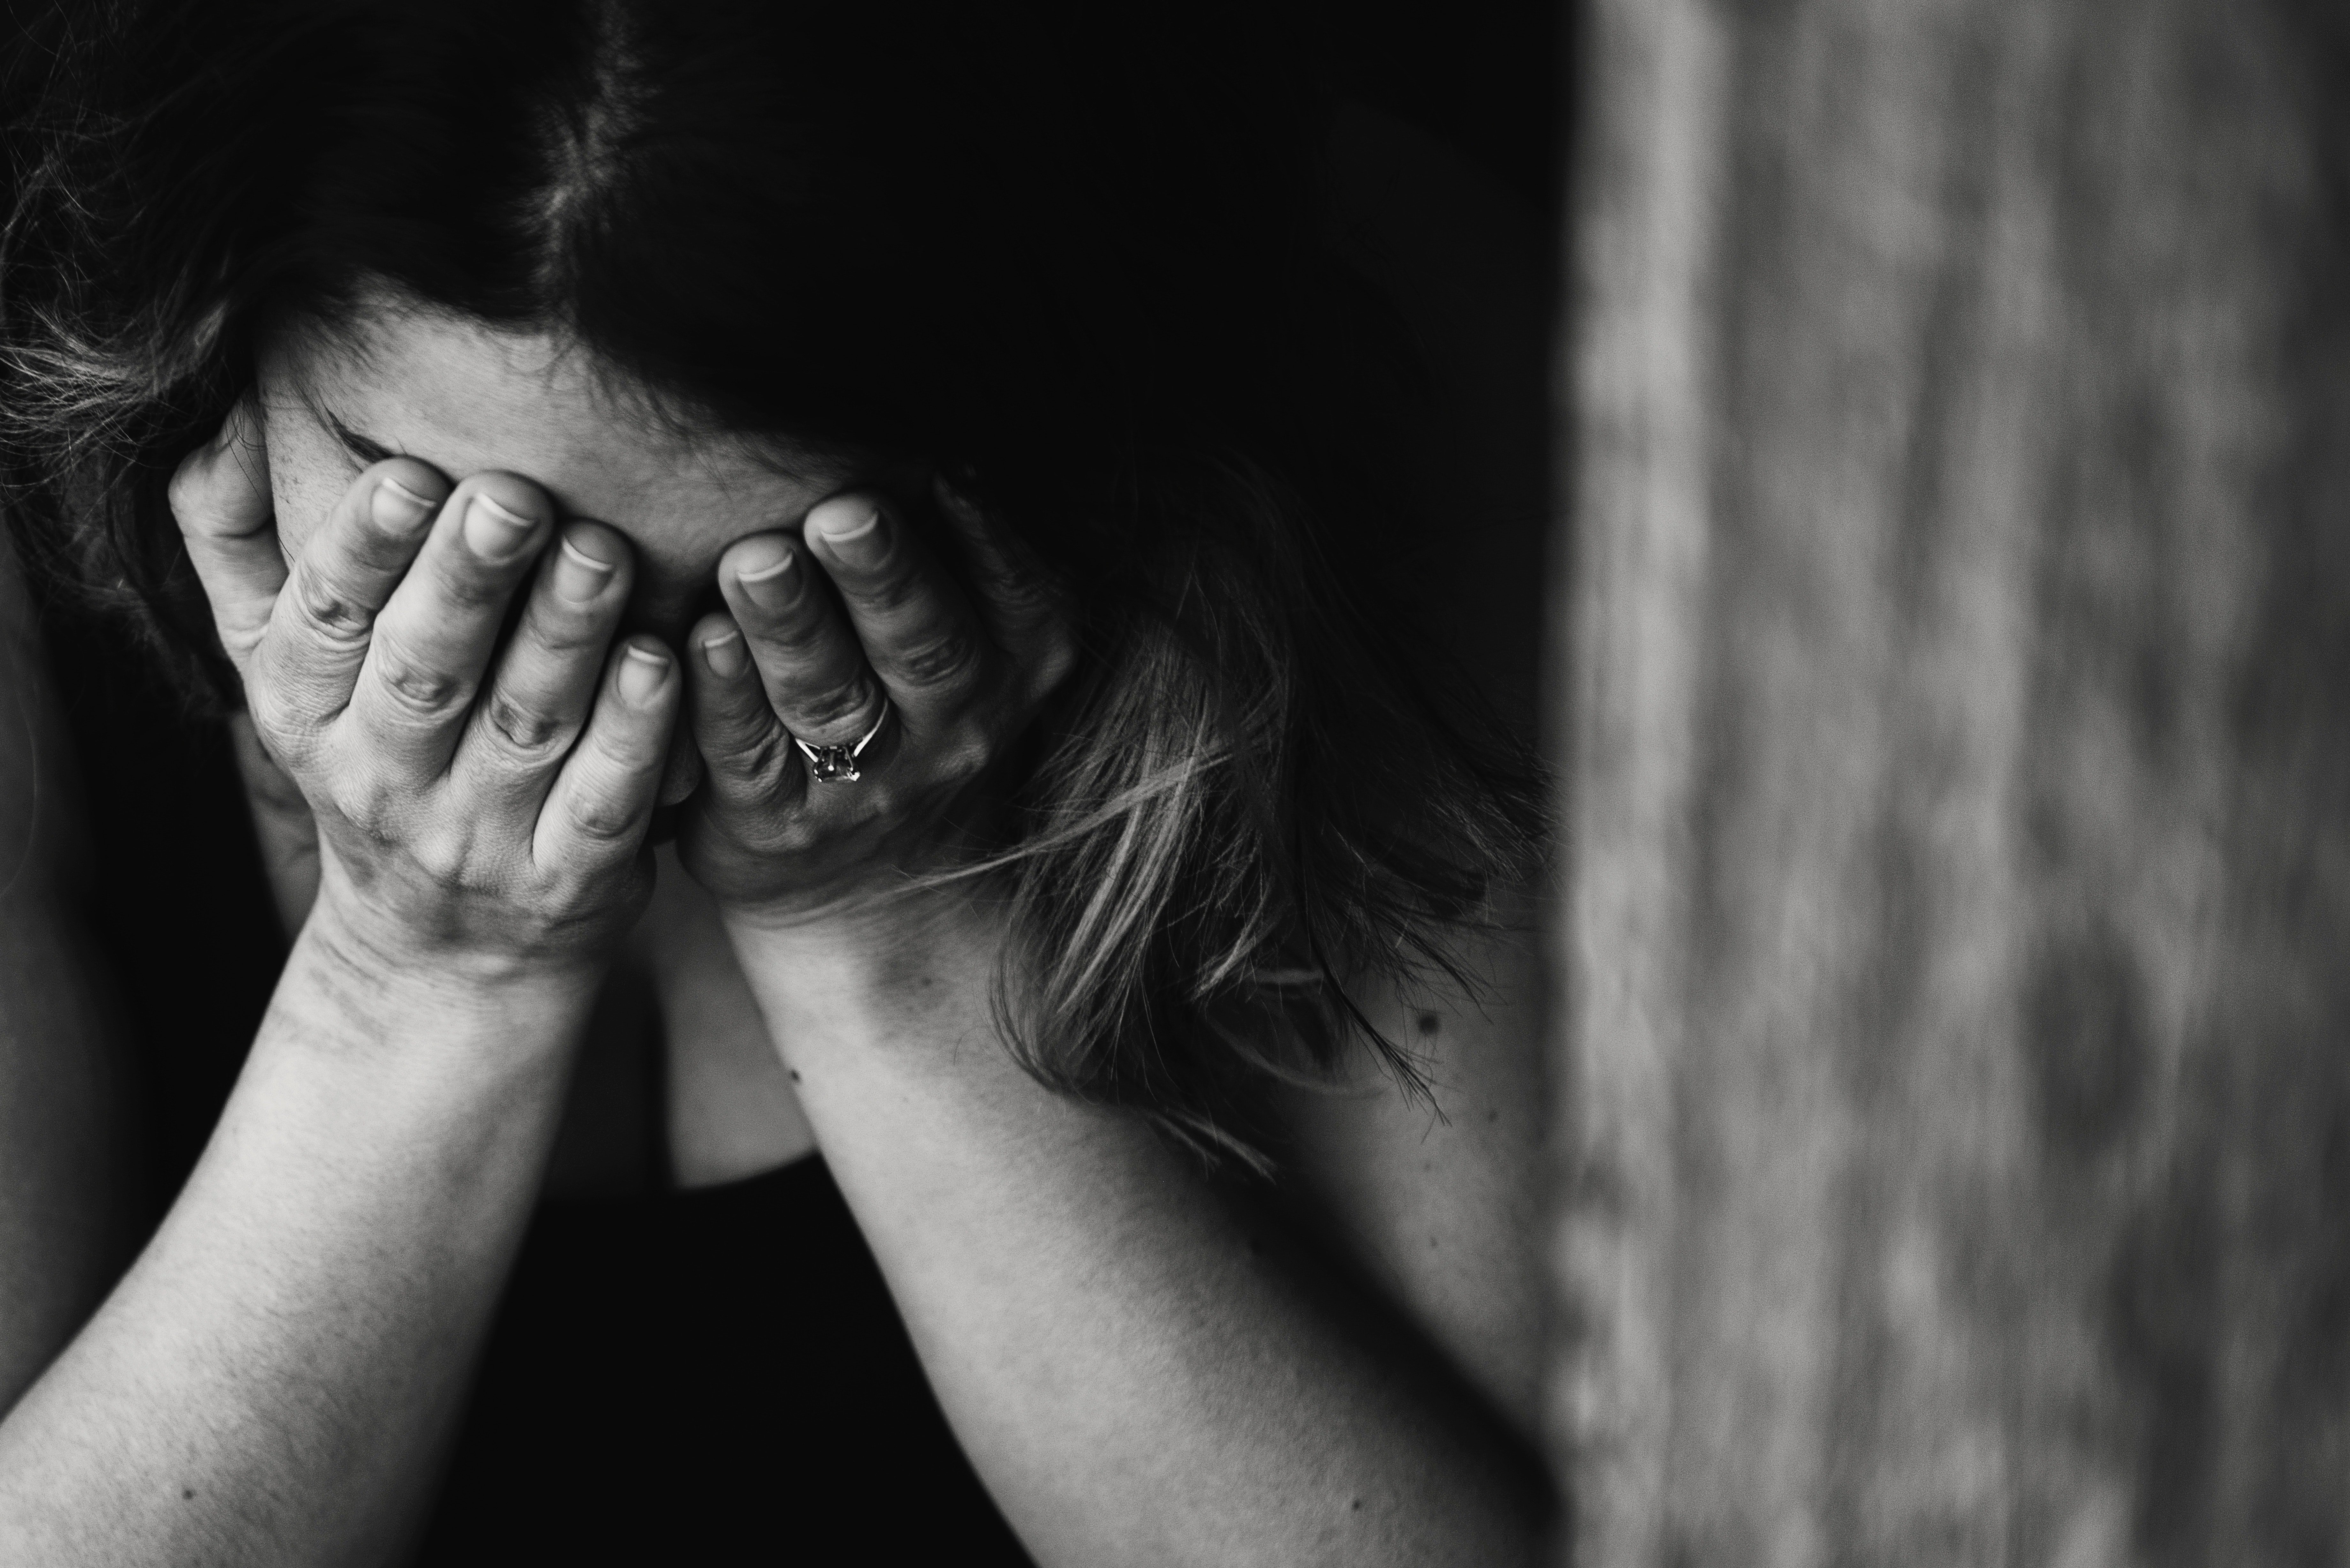 Allison cried to her mom and sister once they arrived. | Source: Pexels